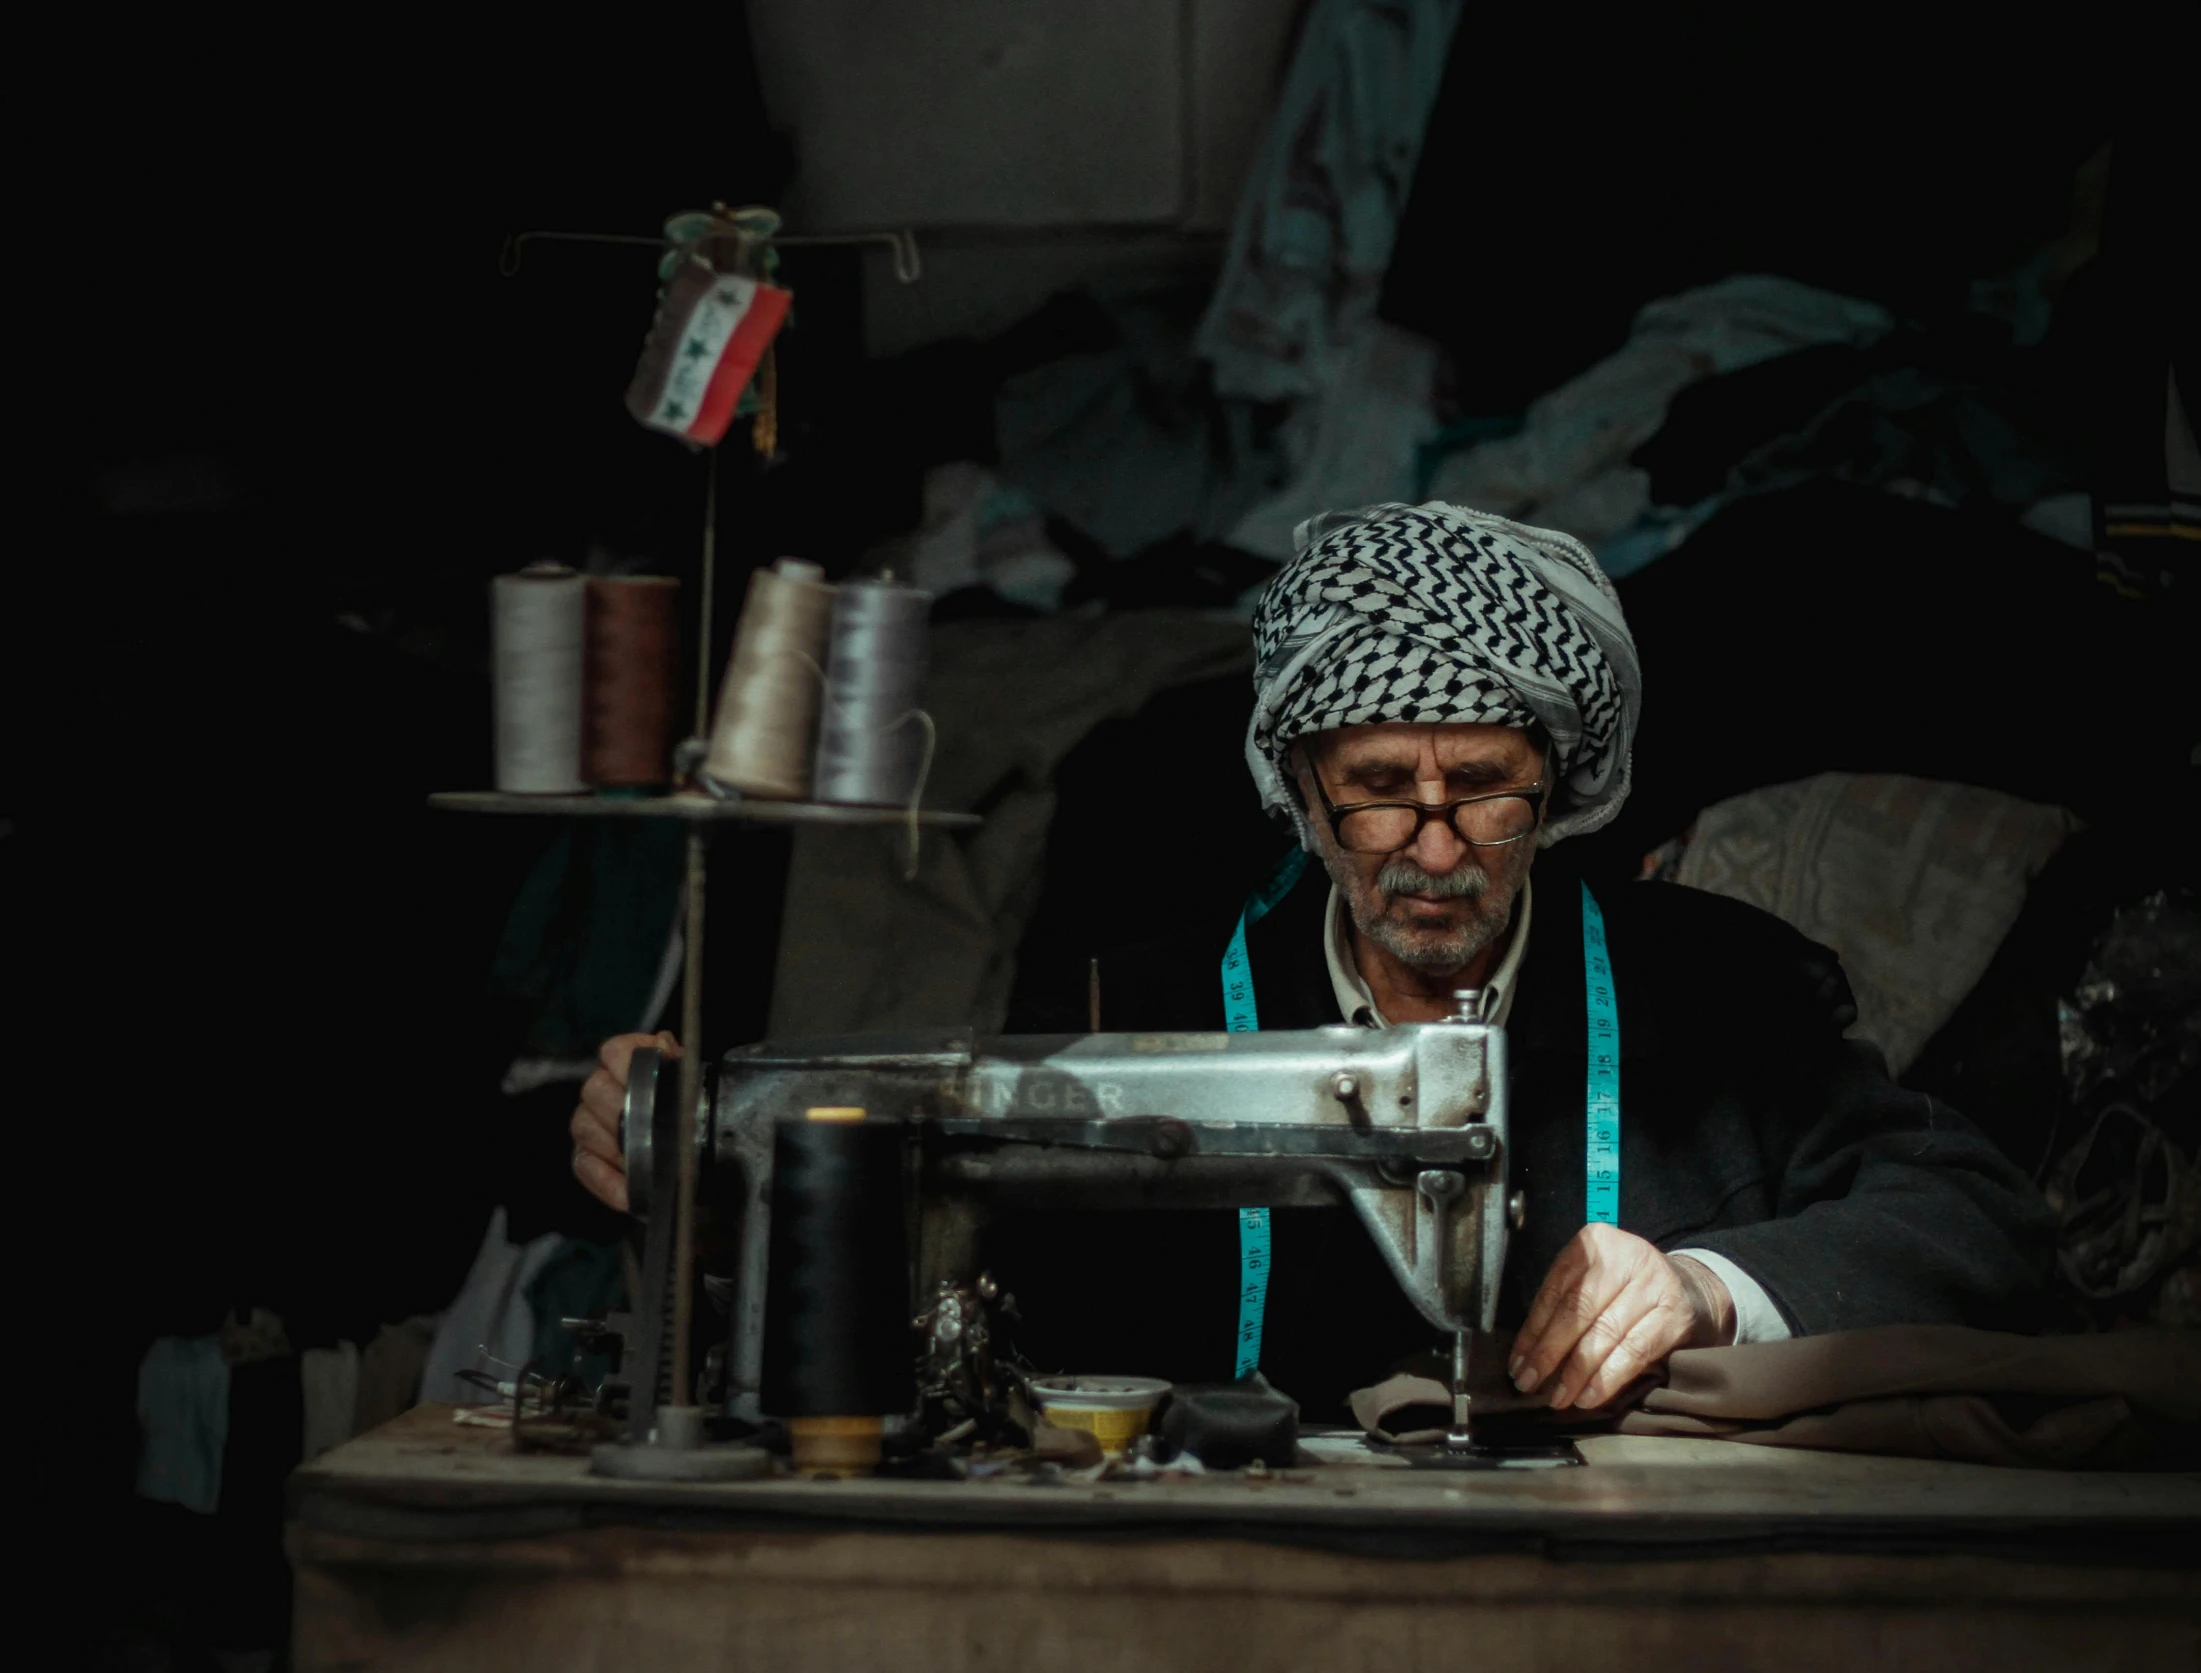 a man in a white turban is sitting behind a sewing machine